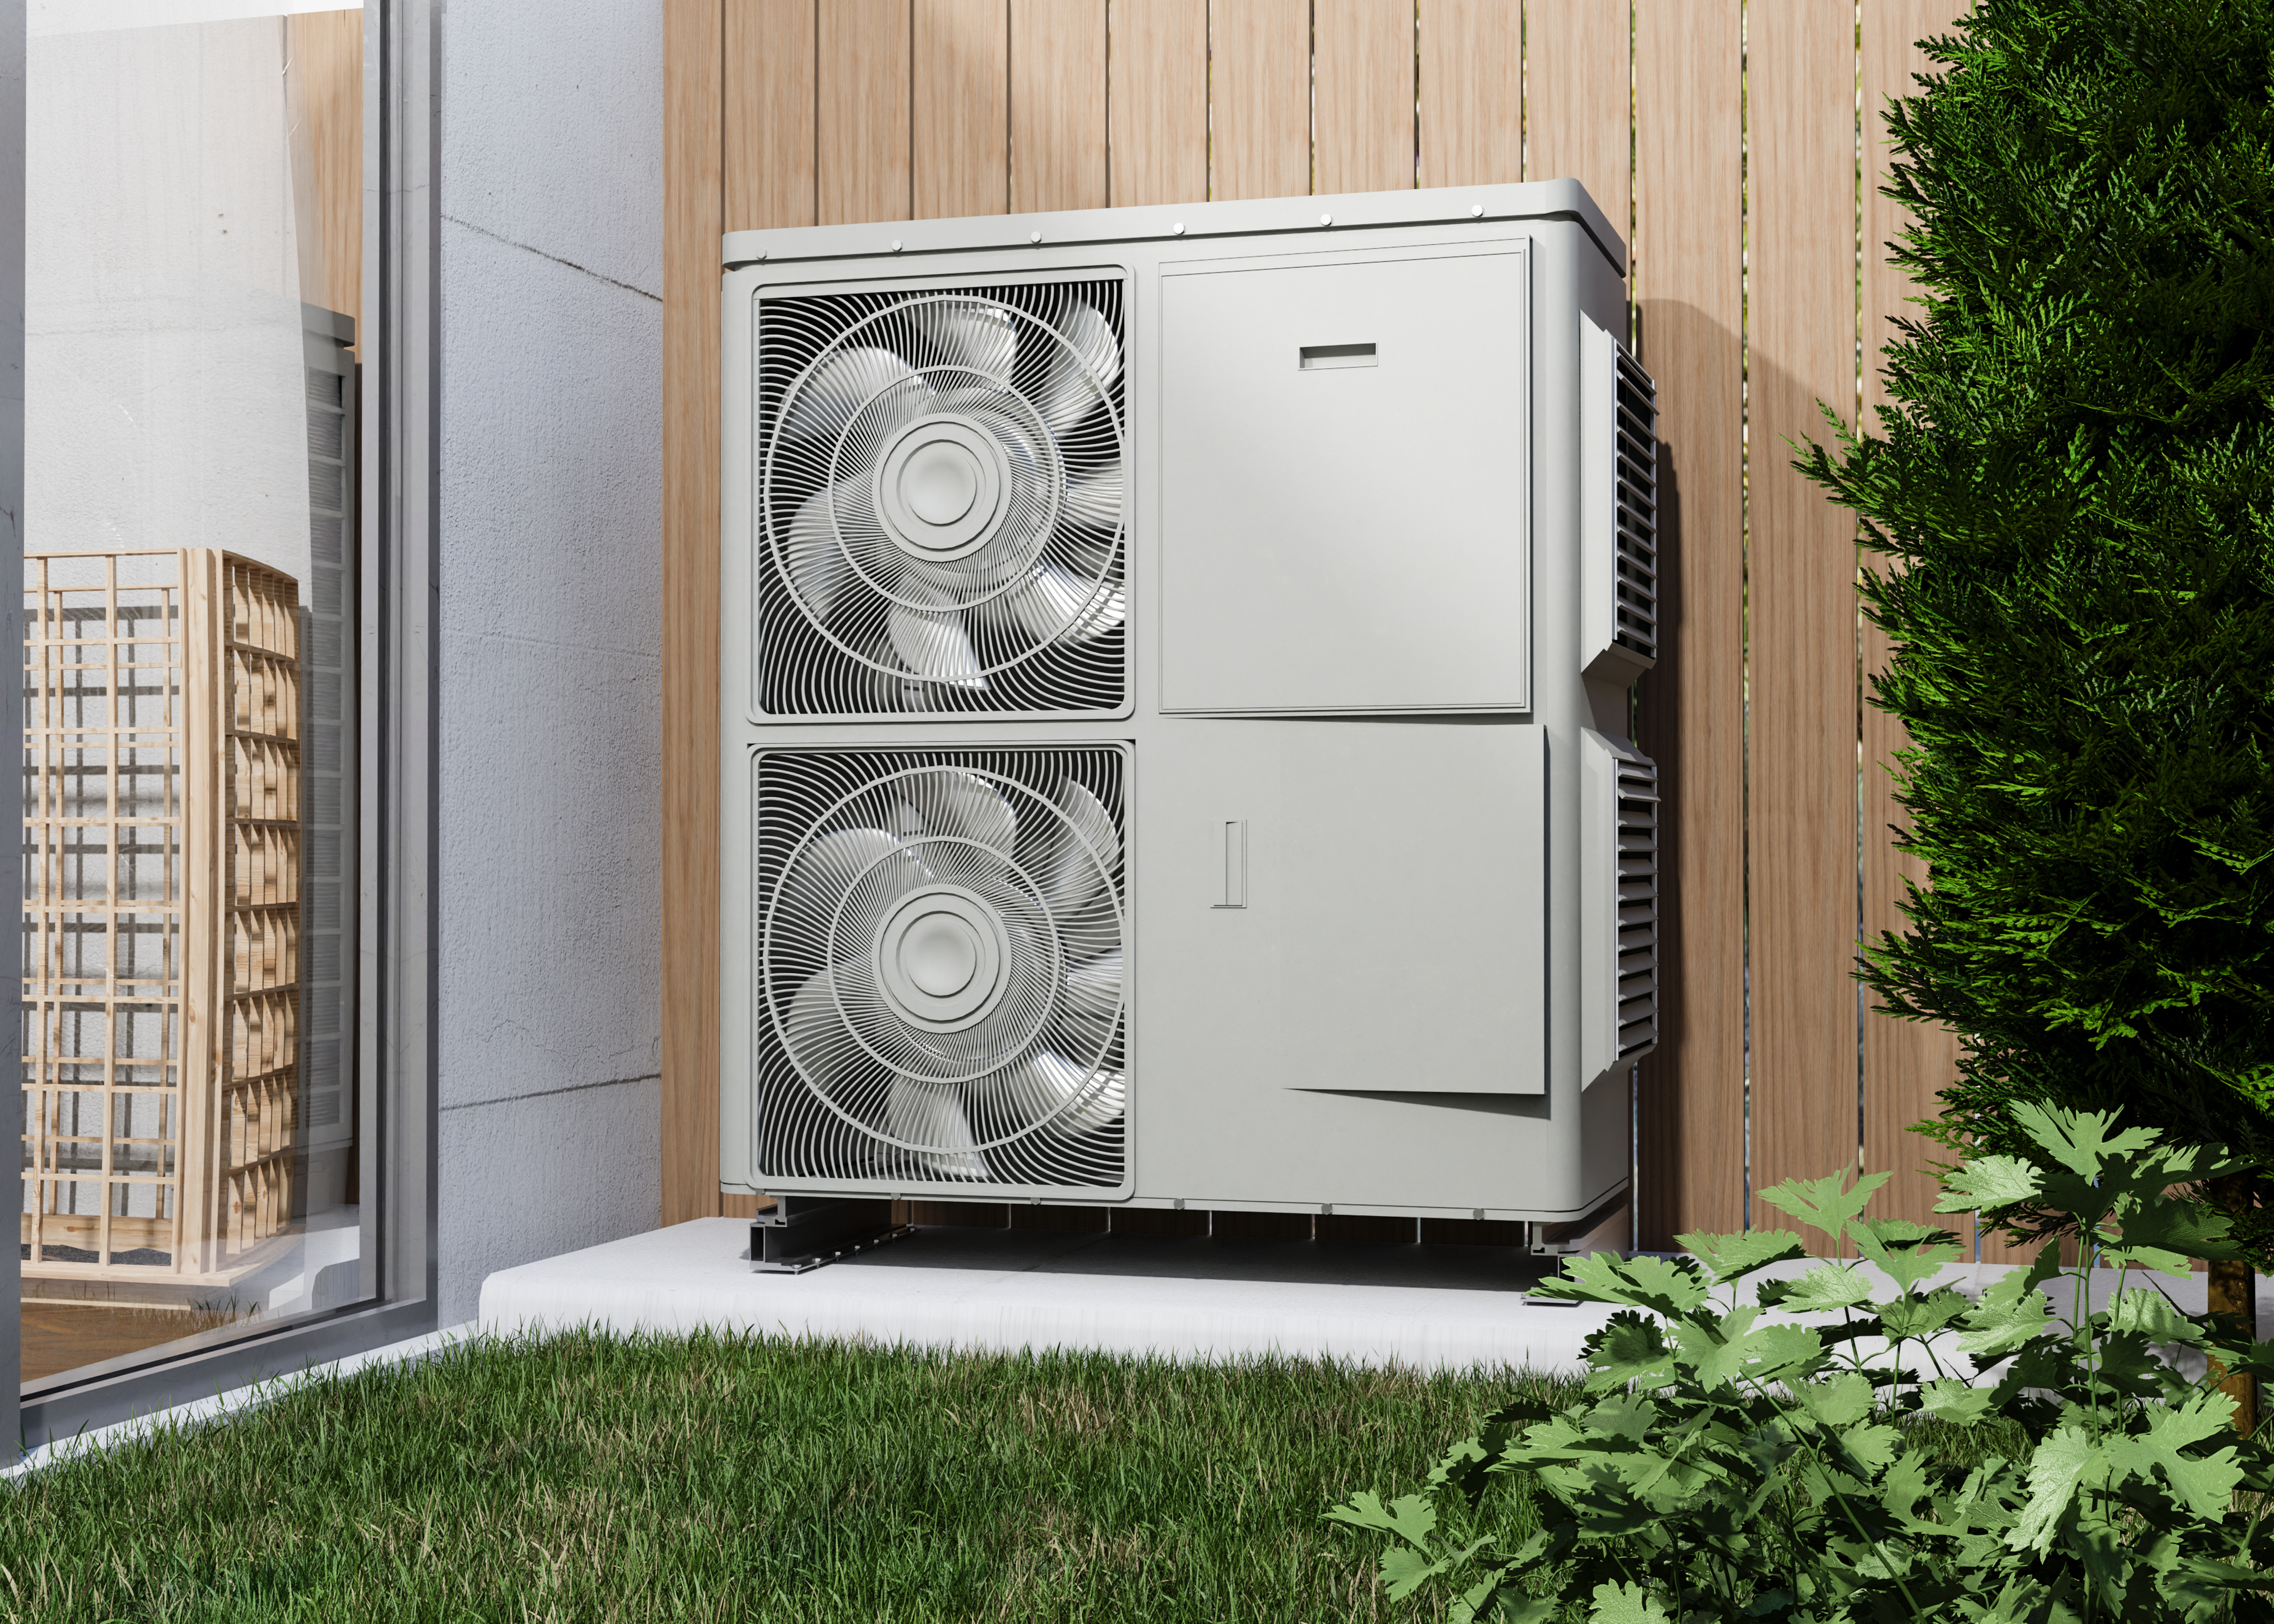 Introducing Heat Pumps to UK Homes